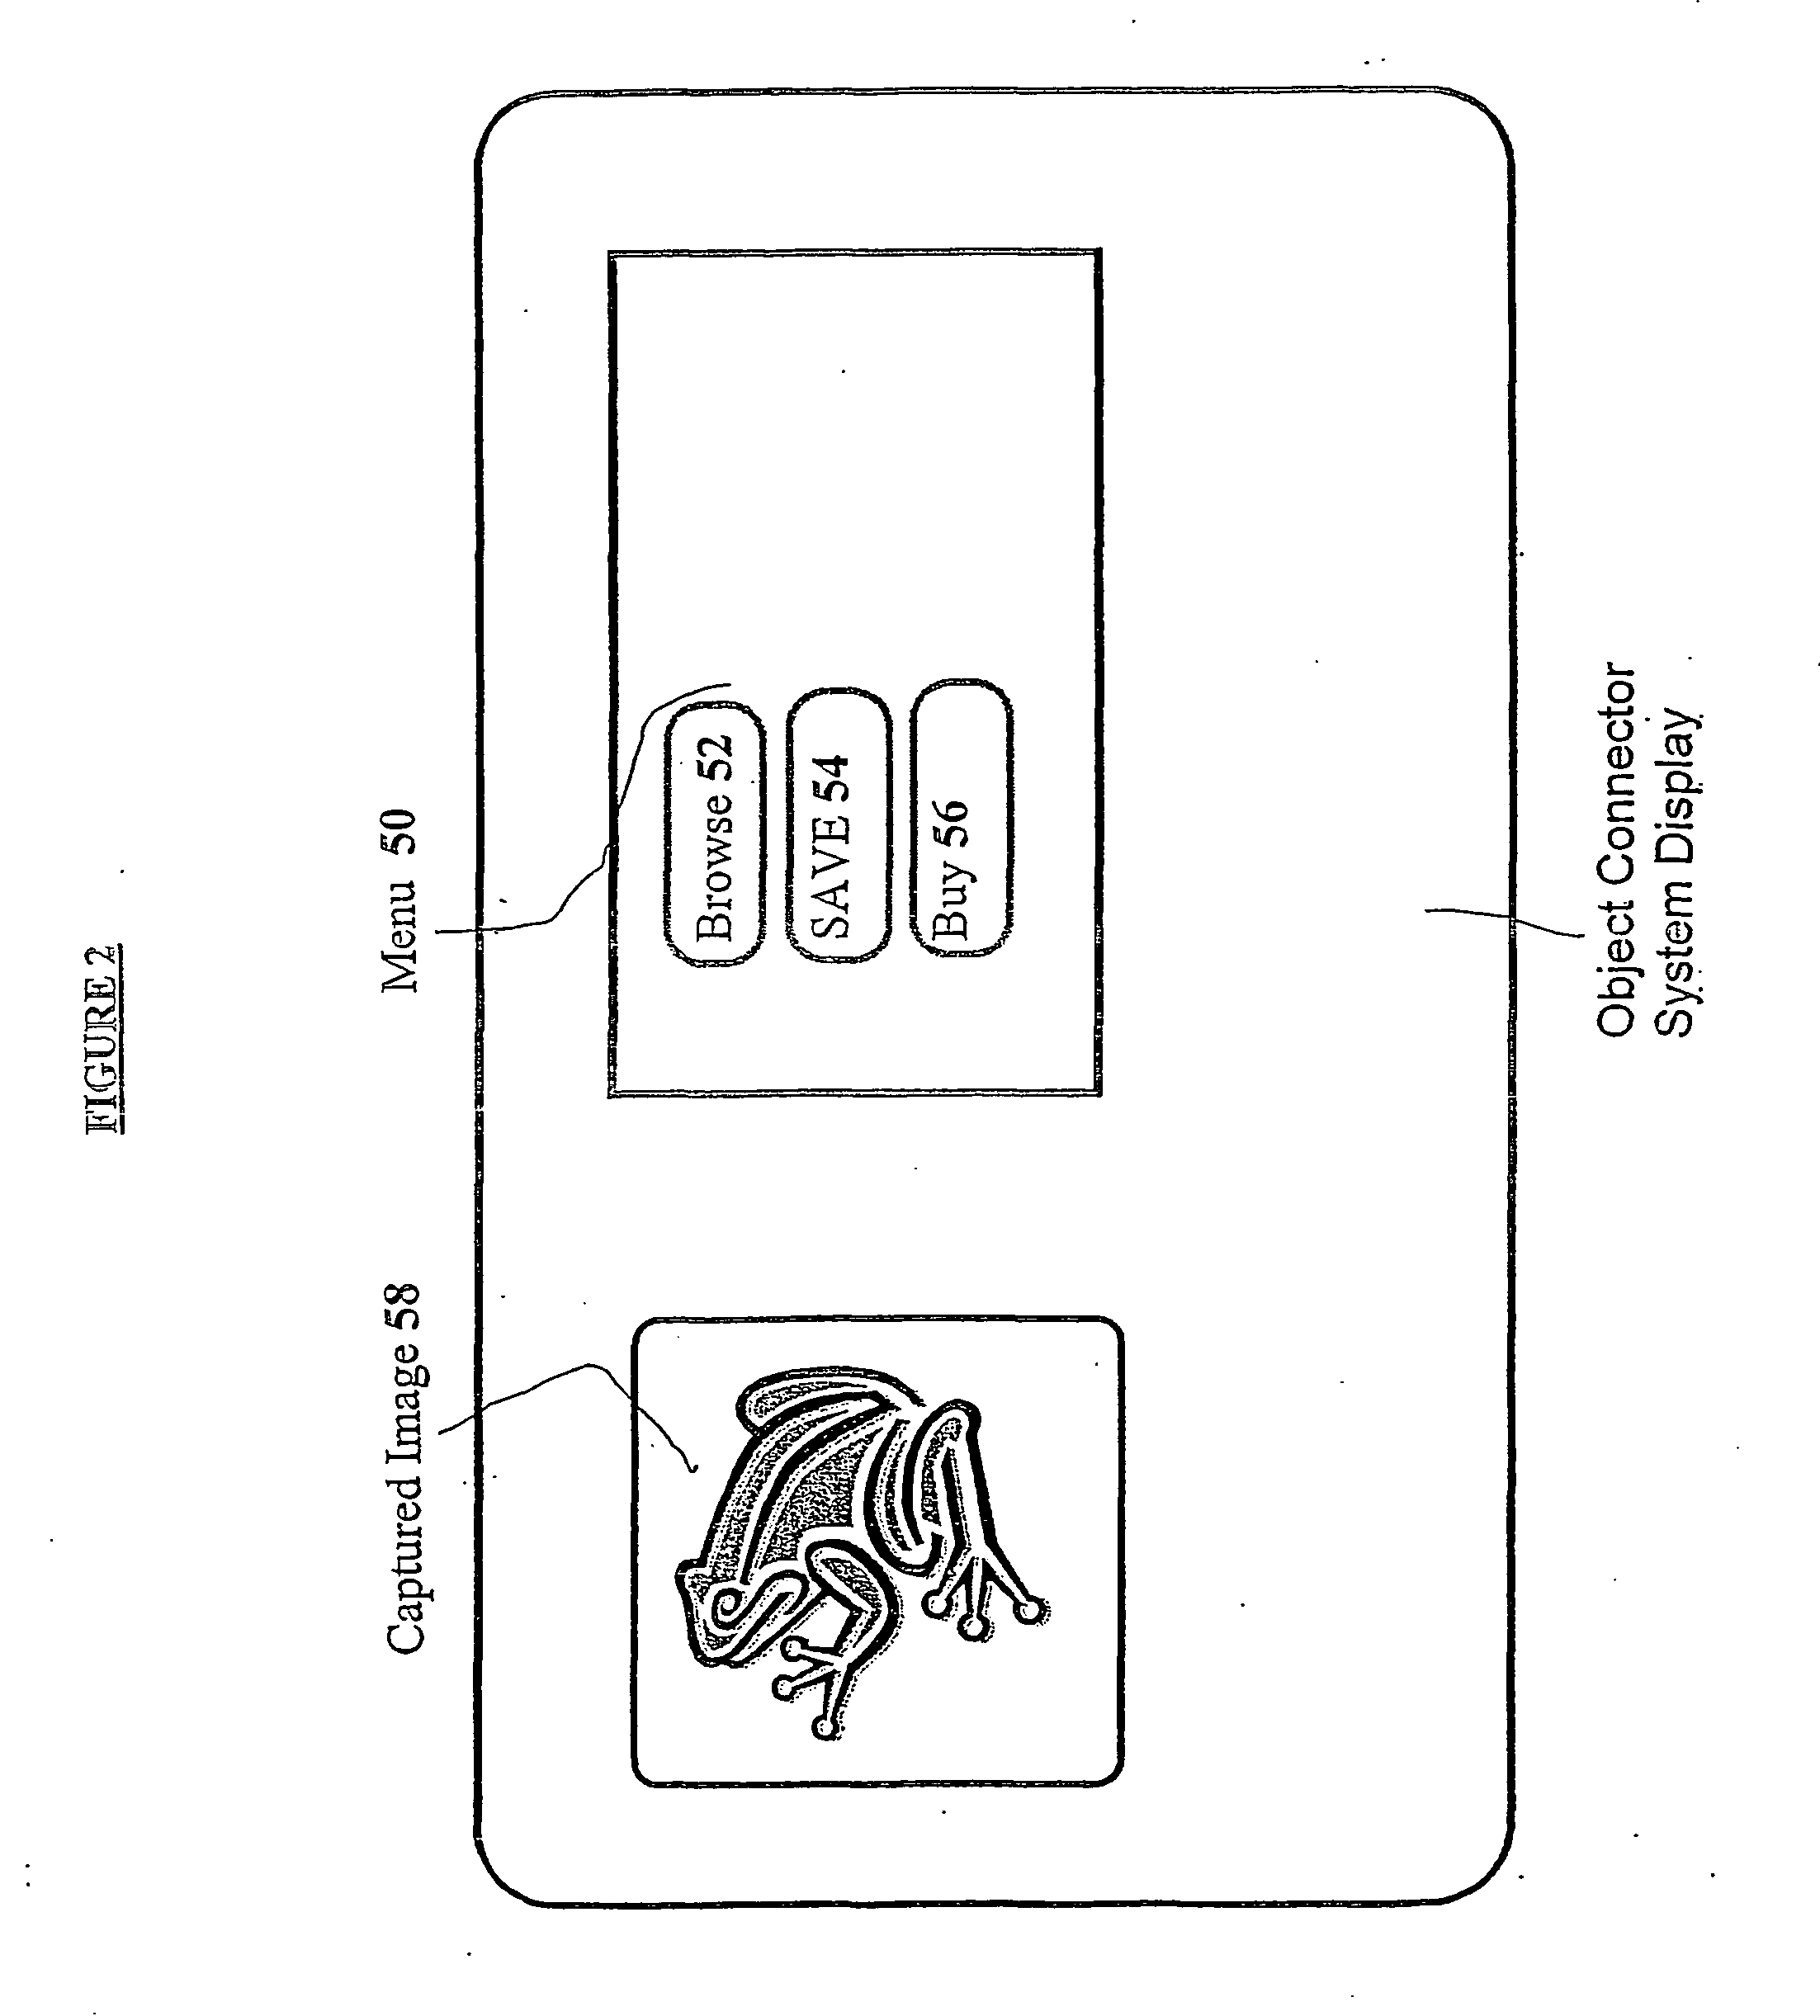 Method and System for Automatically Connecting Real-World Entities Directly to Corresponding Network-Based Data Sources or Services